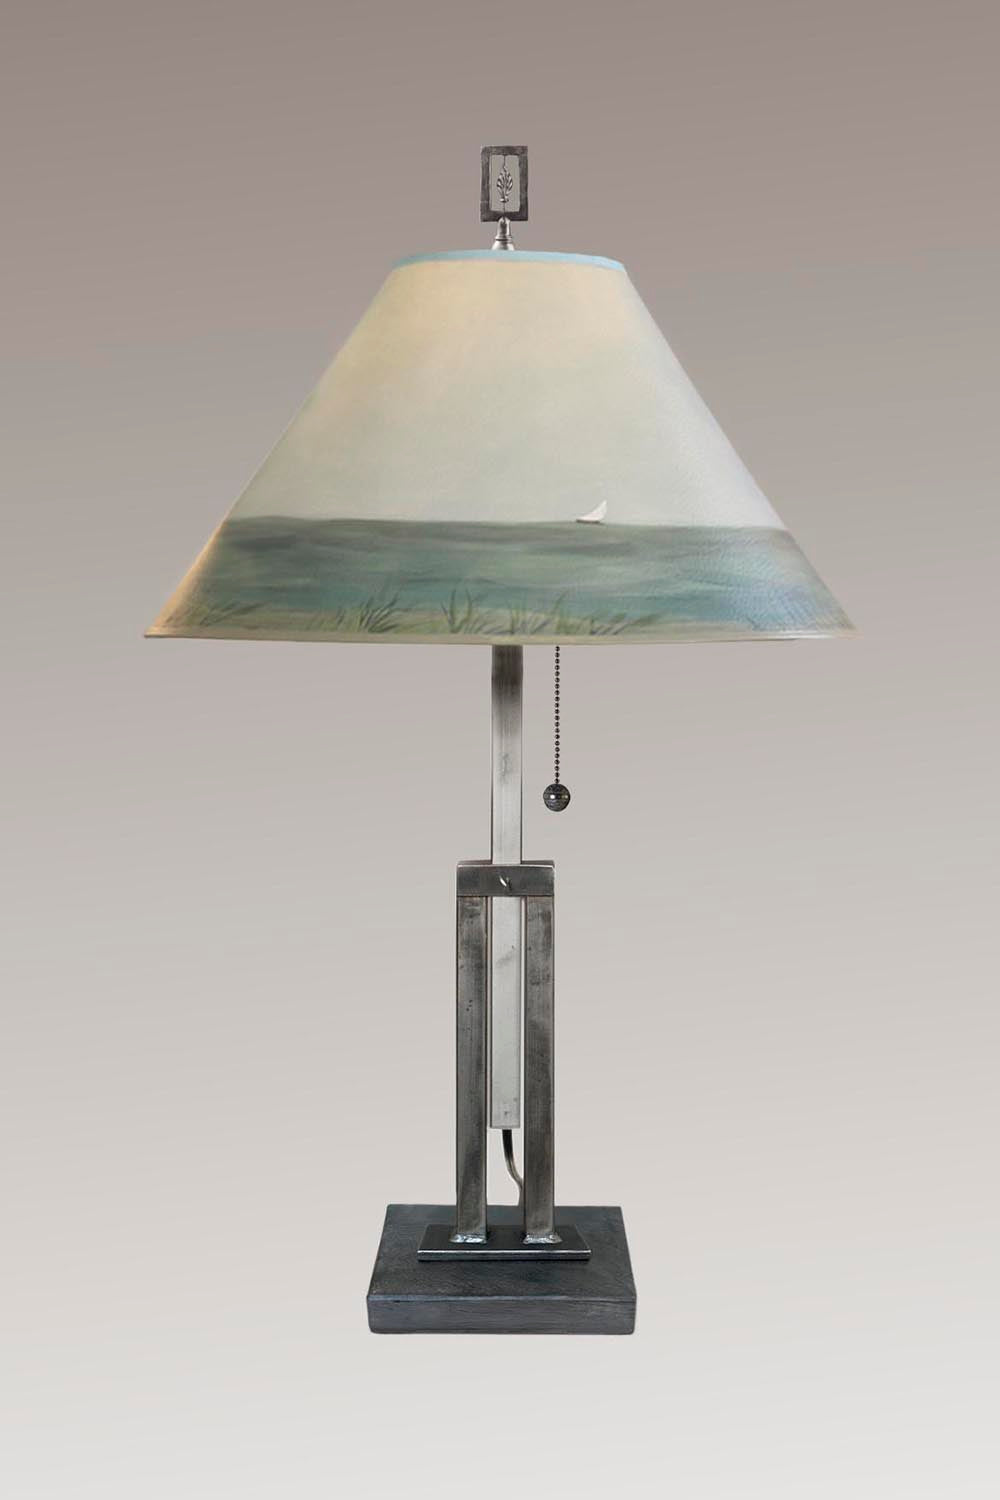 Janna Ugone &amp; Co Table Lamps Adjustable-Height Steel Table Lamp with Large Conical Shade in Shore